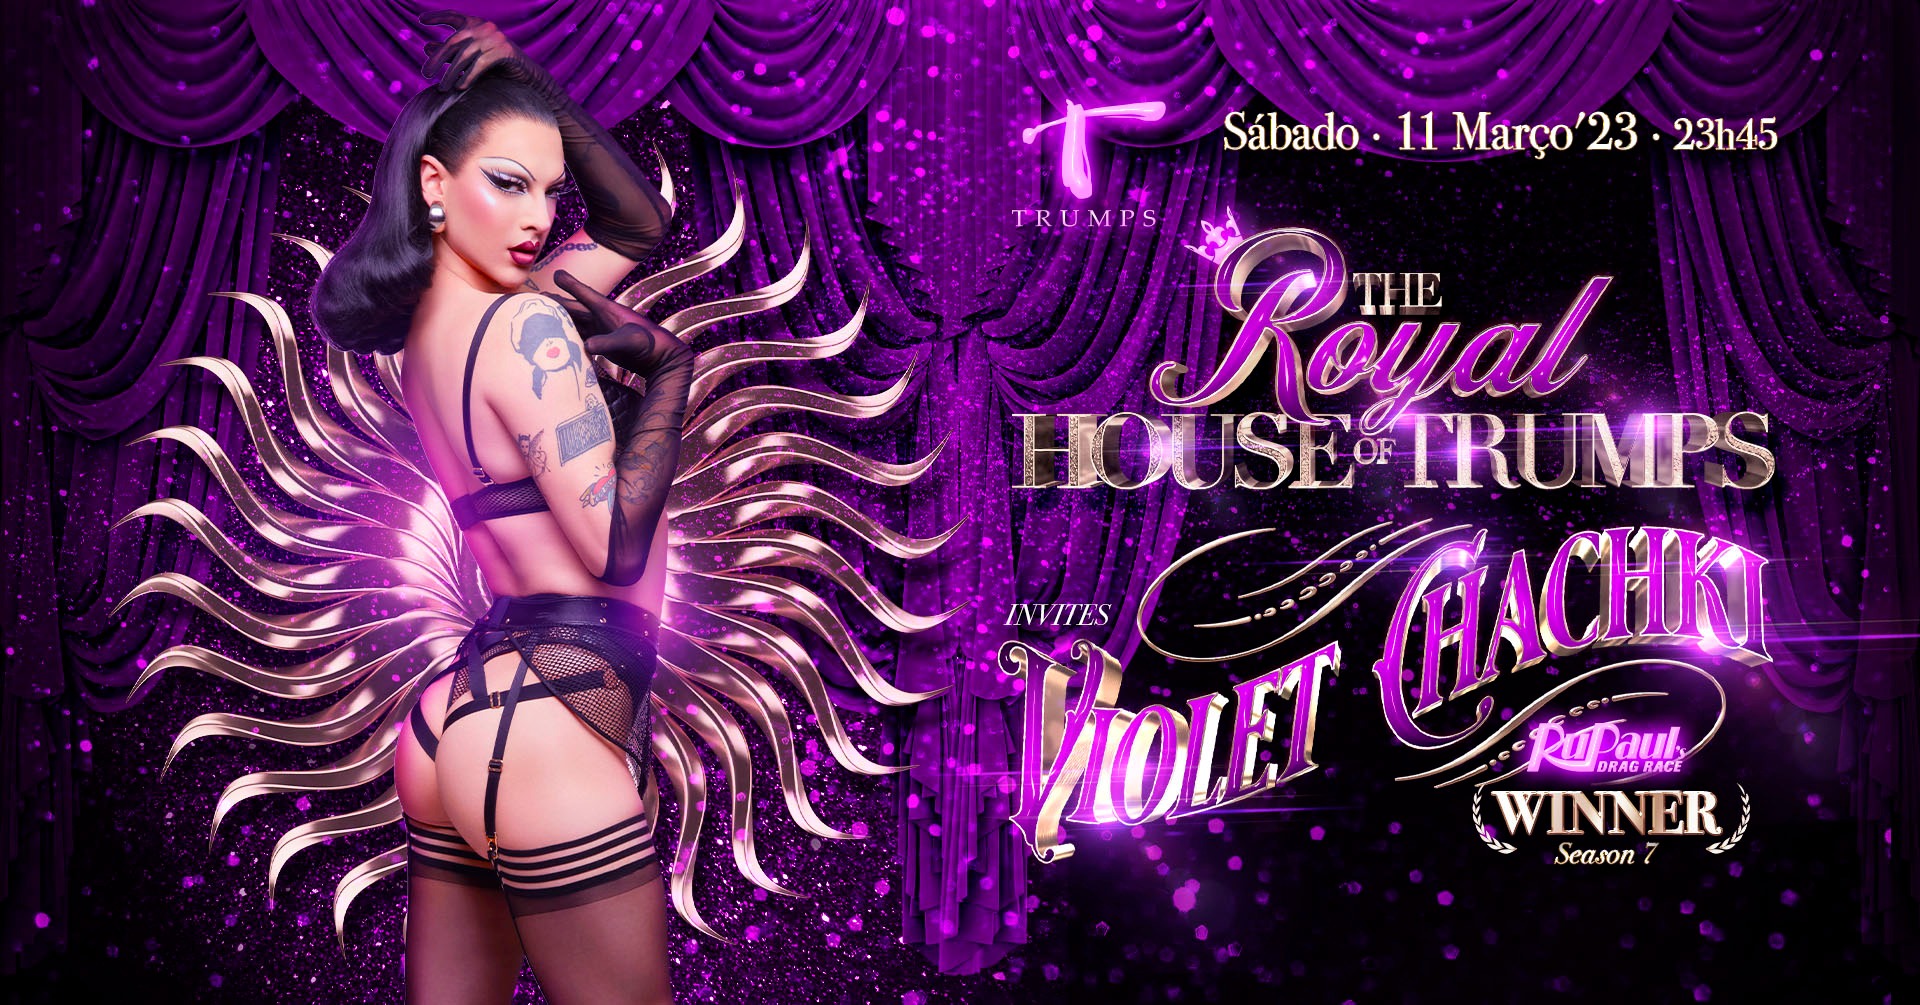 VIOLET CHACHKI @ The Royal House of Trumps